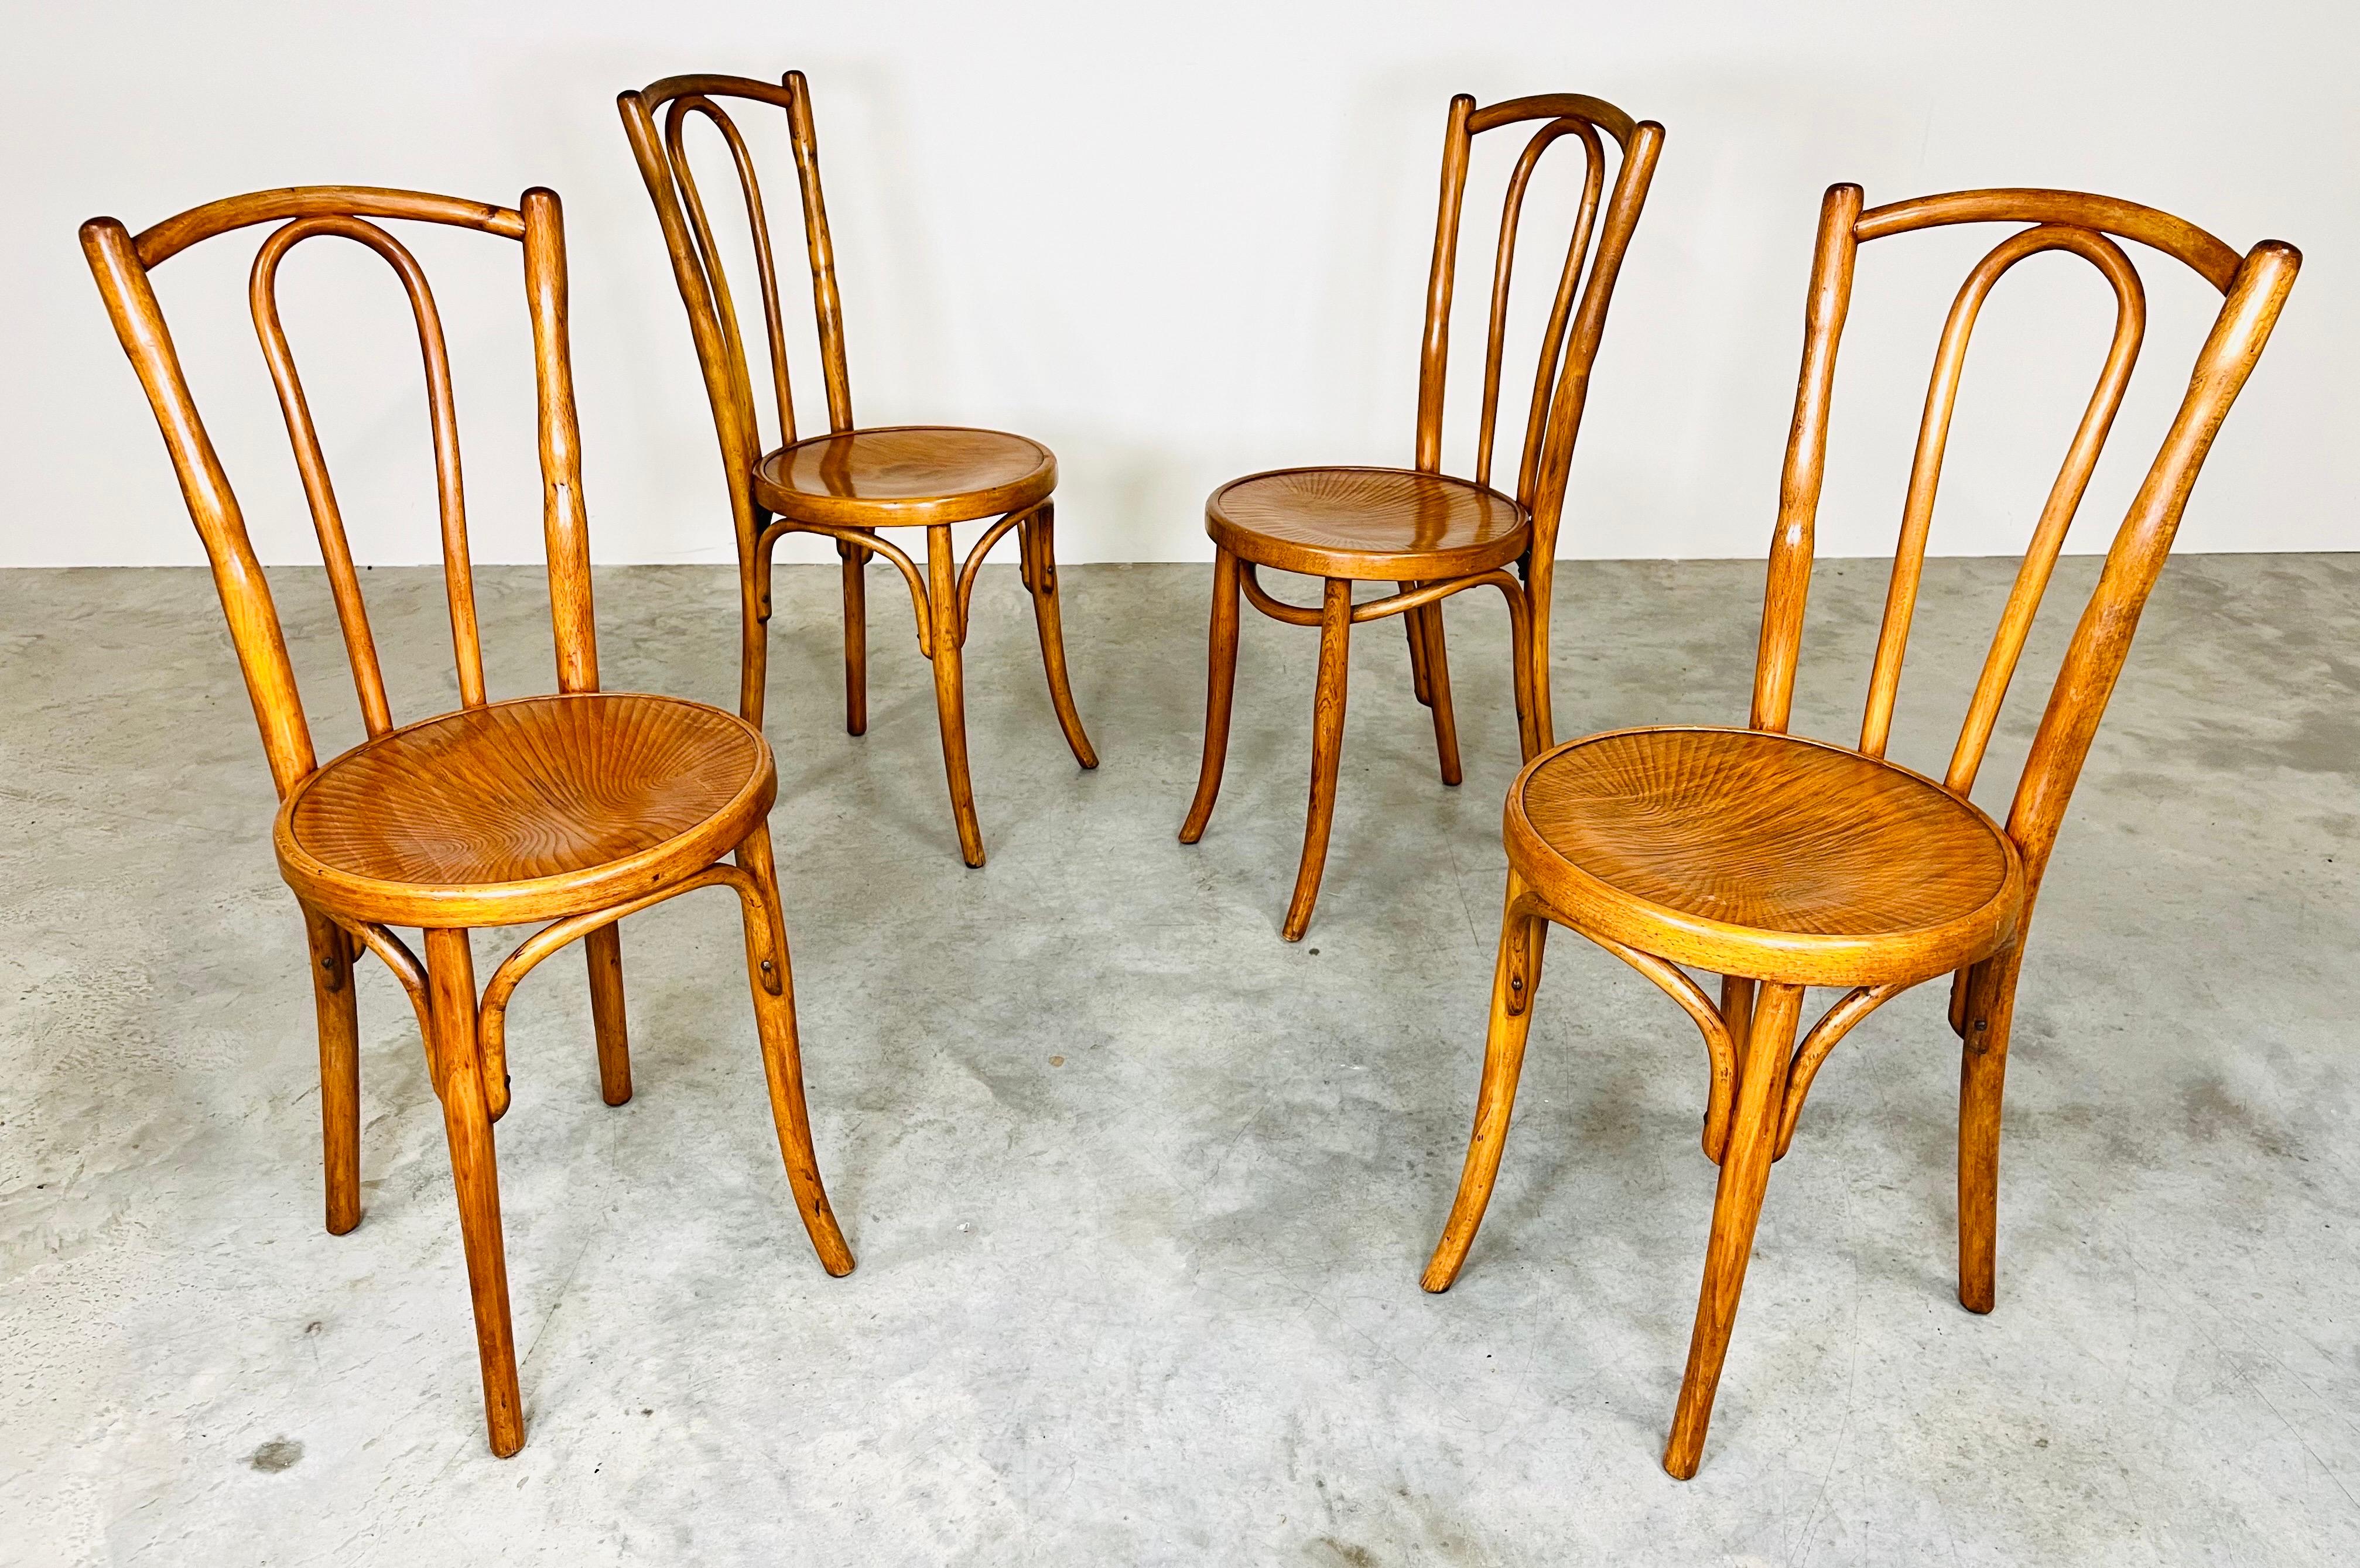 Set of 4 Grotto style bentwood chairs marked with Mazowia as the maker. Chairs feature bentwood back with beautiful curved wood.
Seats each feature a beautiful unique grain pattern. 
Condition is consistent with age having gorgeous patina with